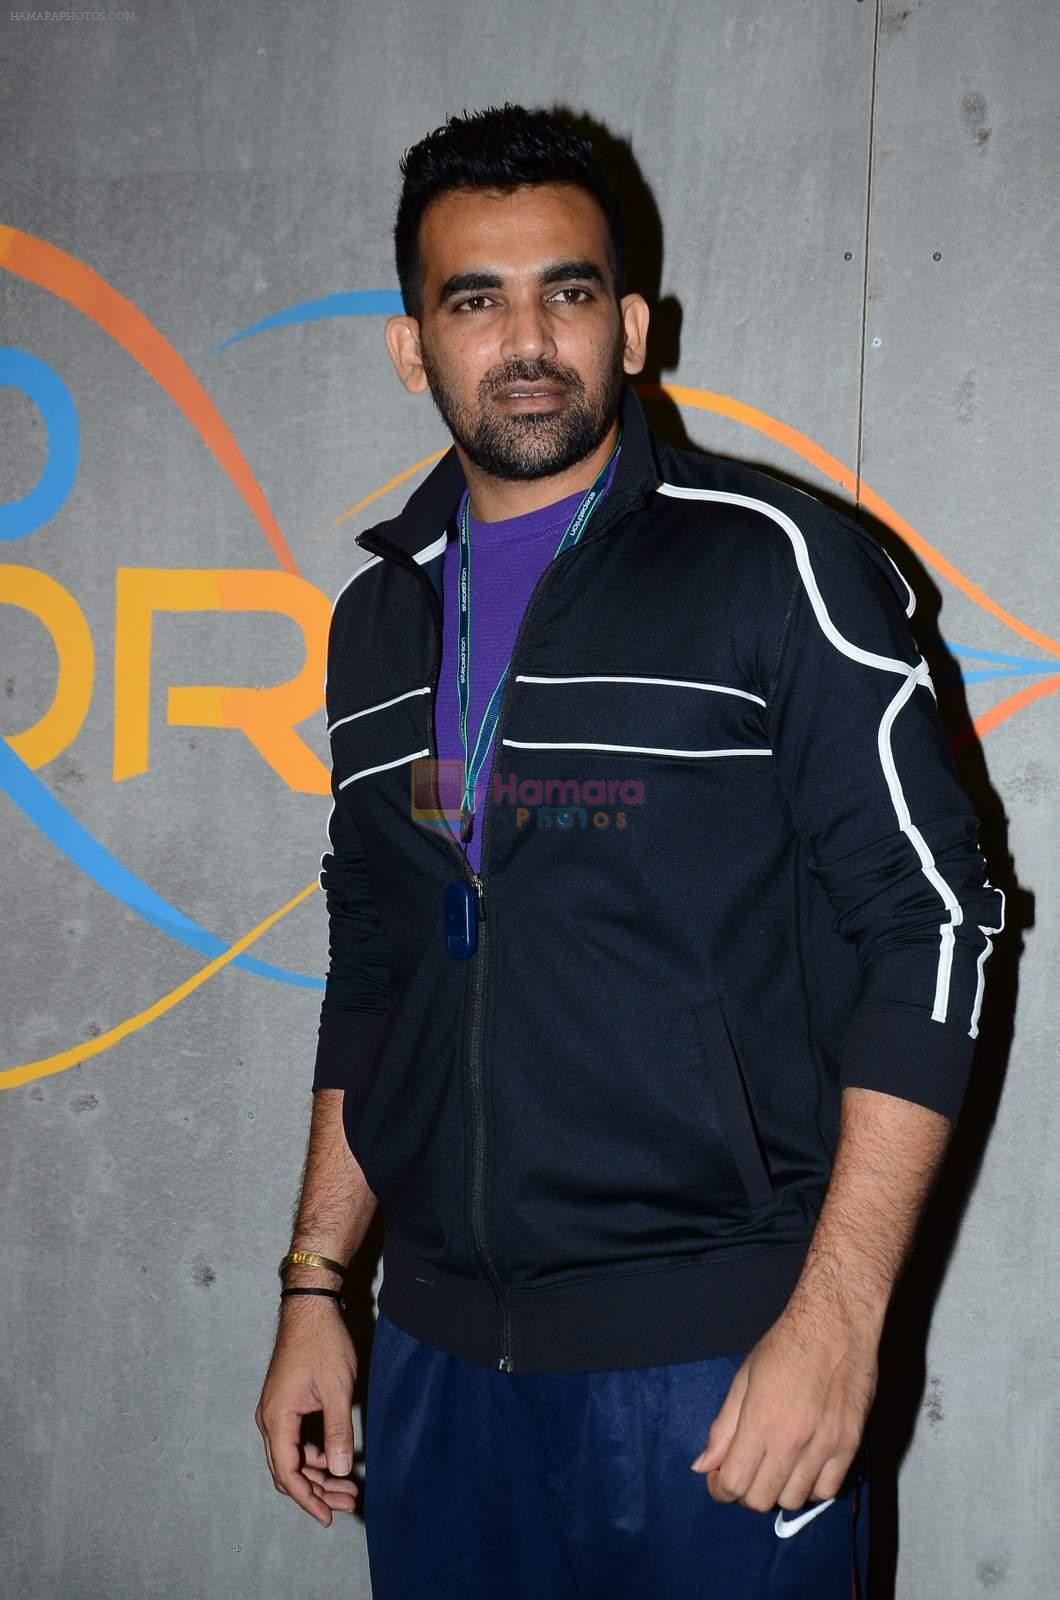 Zaheer Khan's ProSport fitness & sports clinic to promote holistic wellbeing and Sweatworking on 19th March 2015